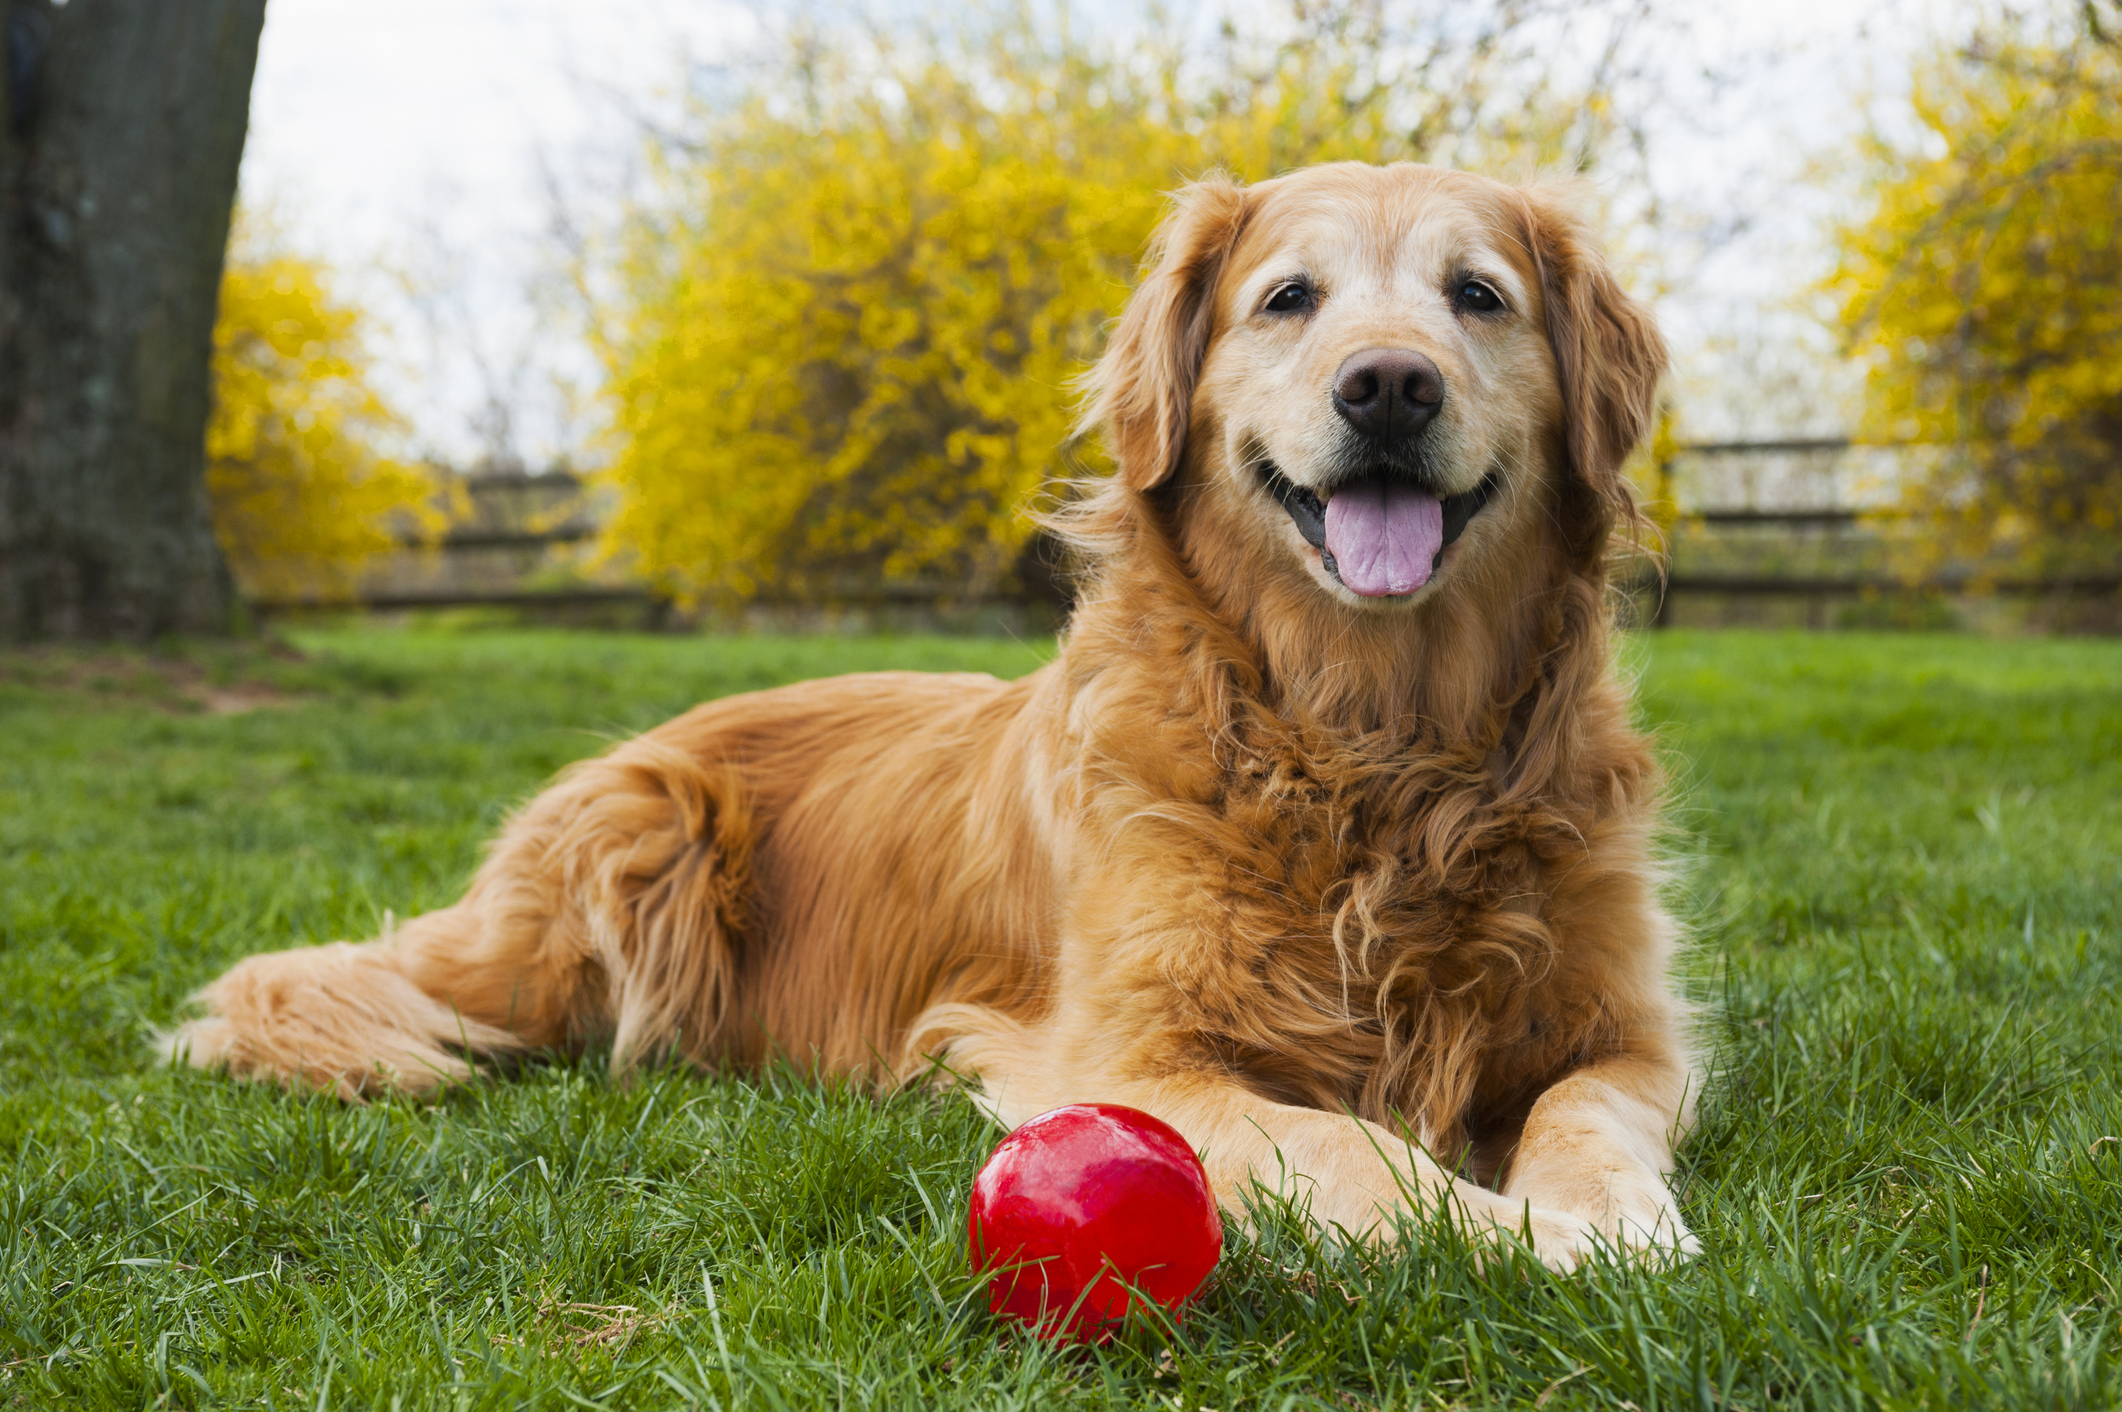 Senior Golden Retriever with white muzzle lying outside in the grass